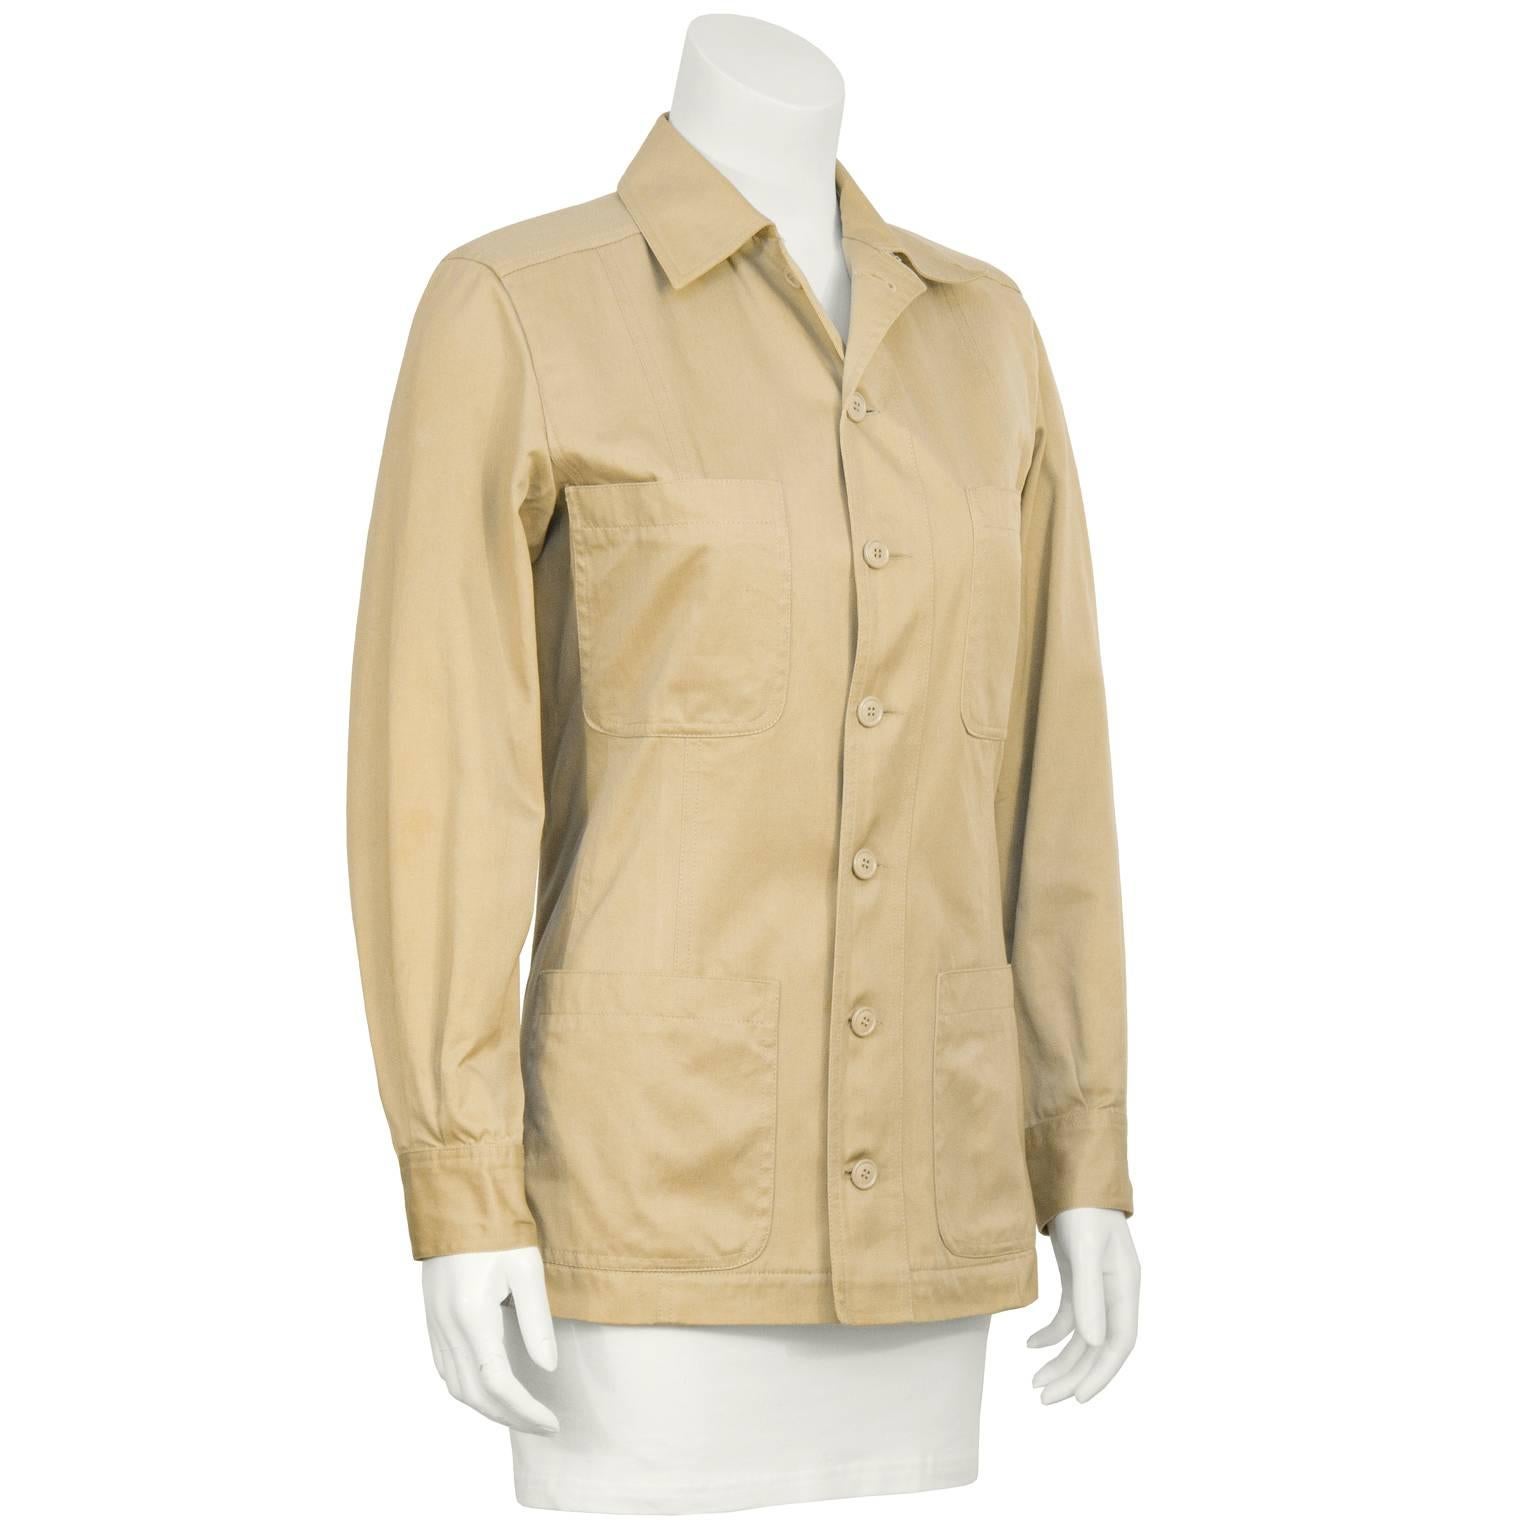 1990’s Yves Saint Laurent Rive Gauche safari style jacket in cotton khaki. The jacket buttons down the front and features four pockets at the breast and at the hips, finished with a buttoned barrel cuff. In excellent condition. Fits like a US 4.